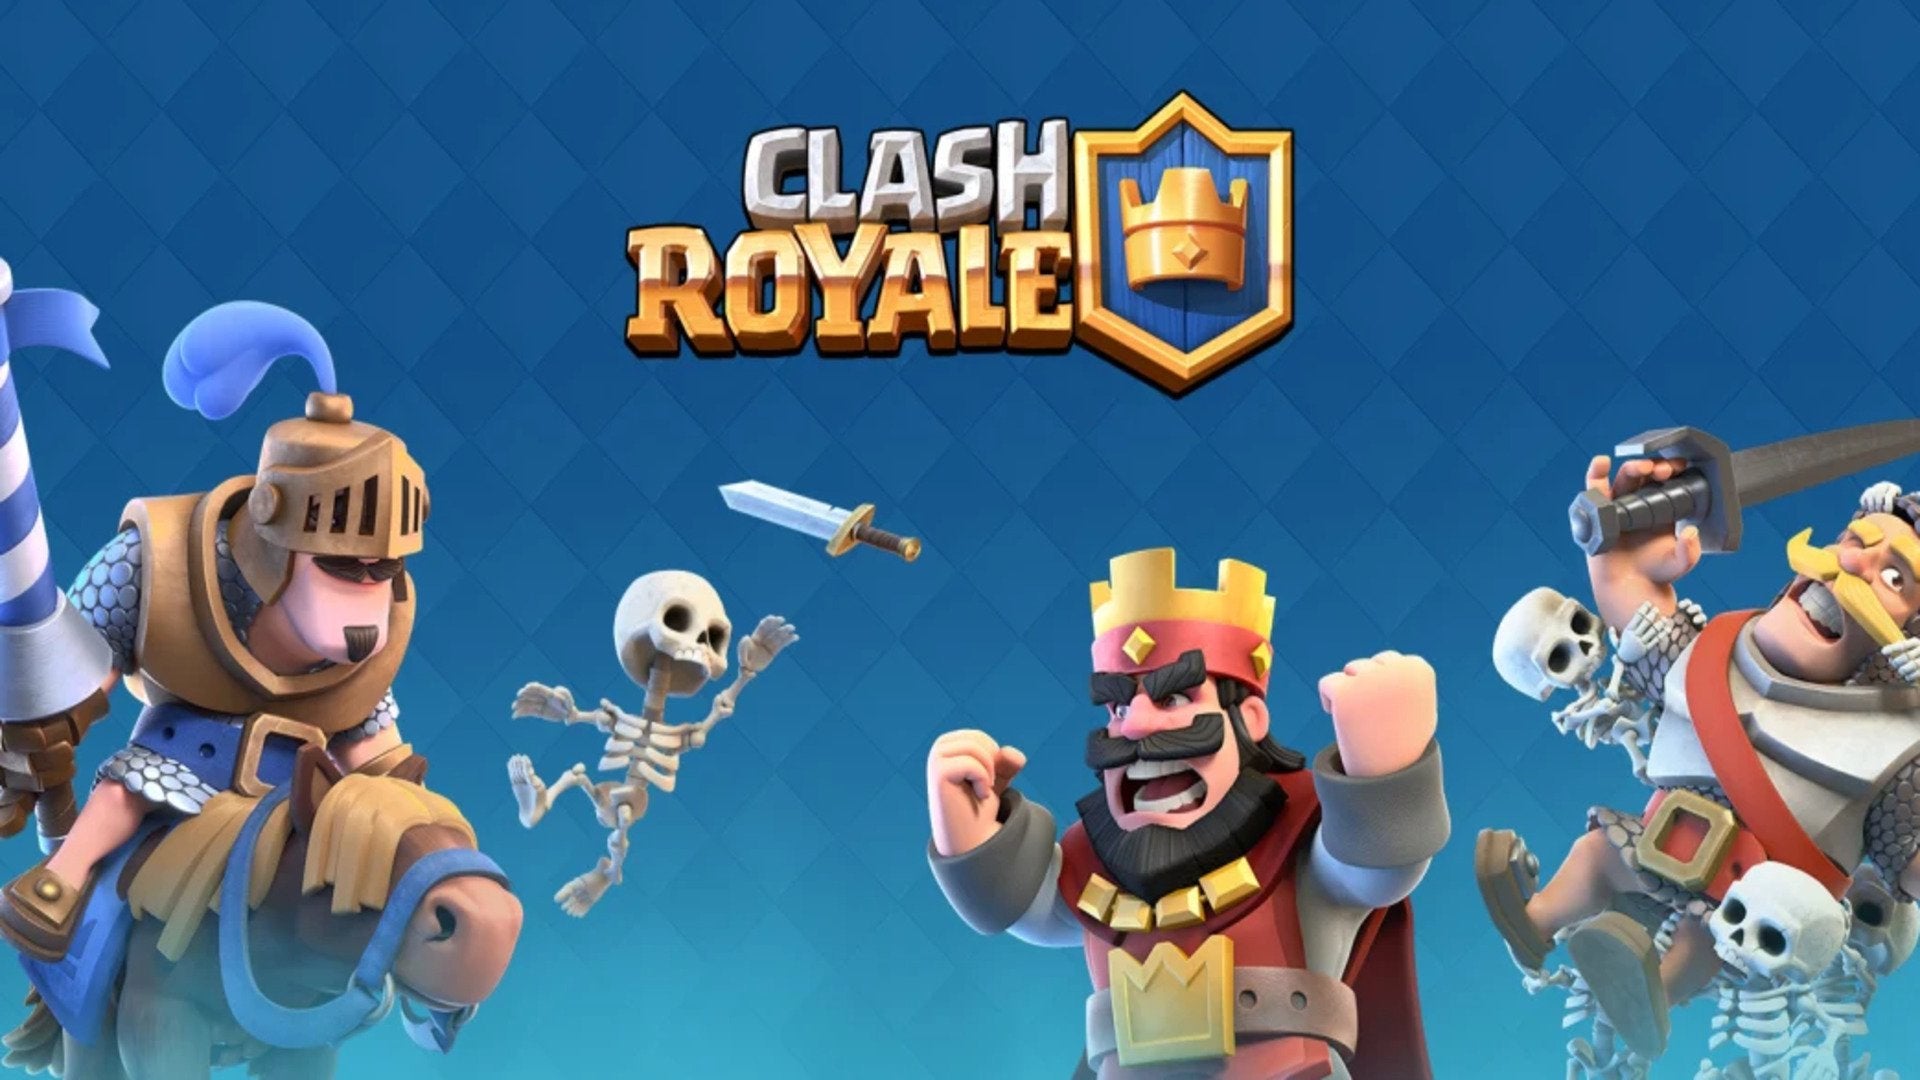 Art from Clash Royale featuring a knight and skeleton facing off against a King.